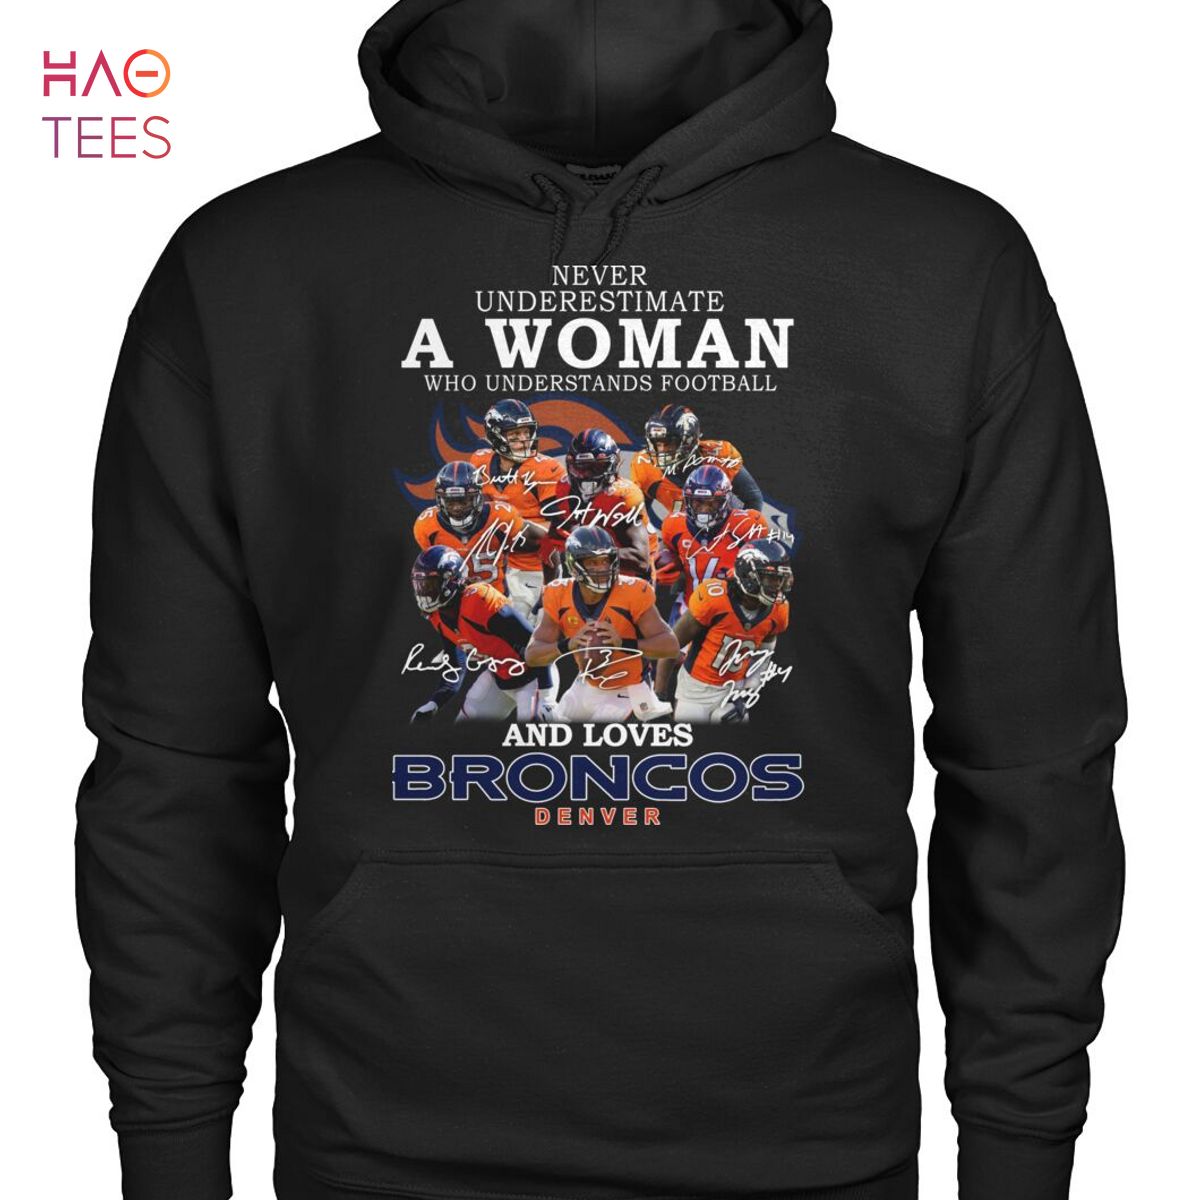 A Woman Who Understands Football And Loves Broncos